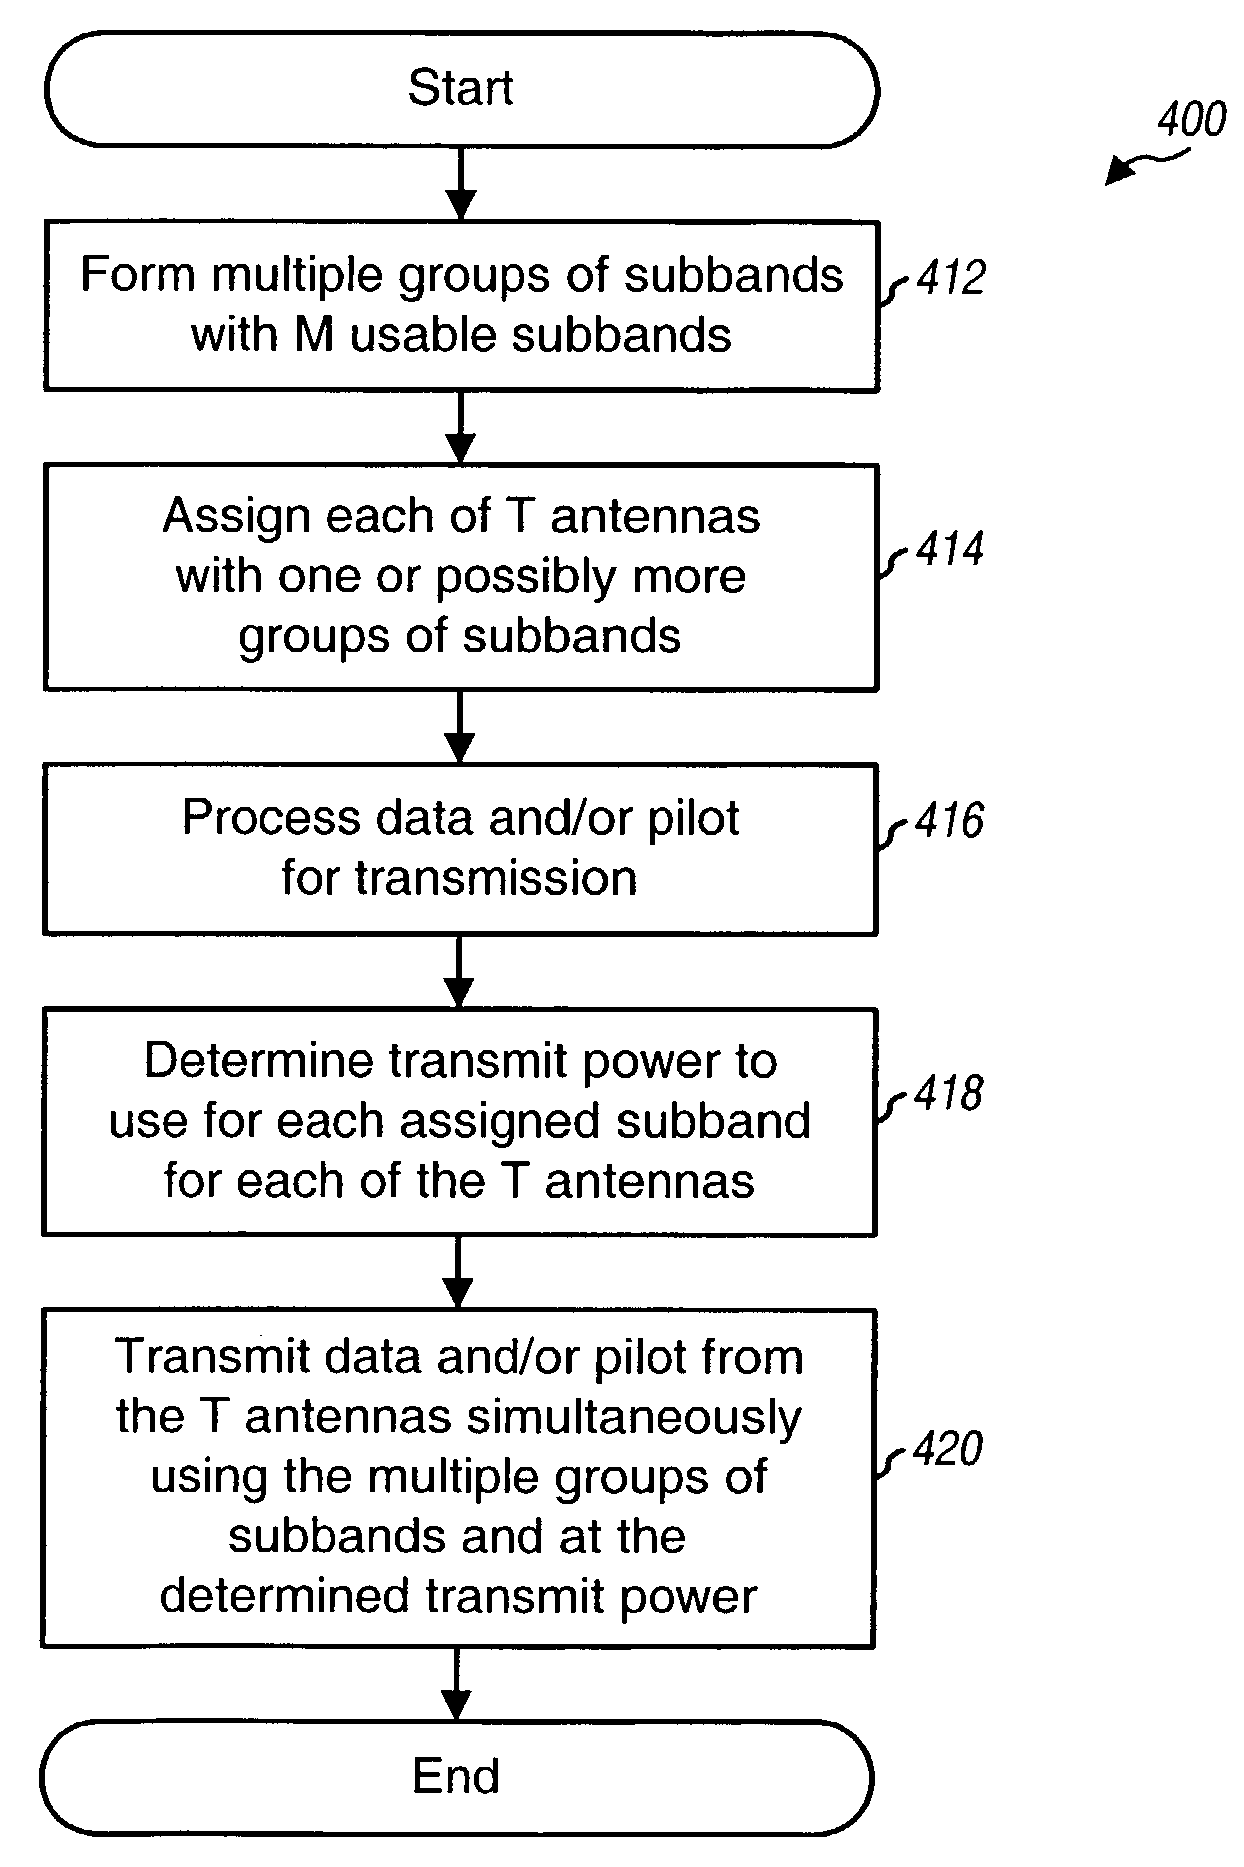 Transmission schemes for multi-antenna communication systems utilizing multi-carrier modulation